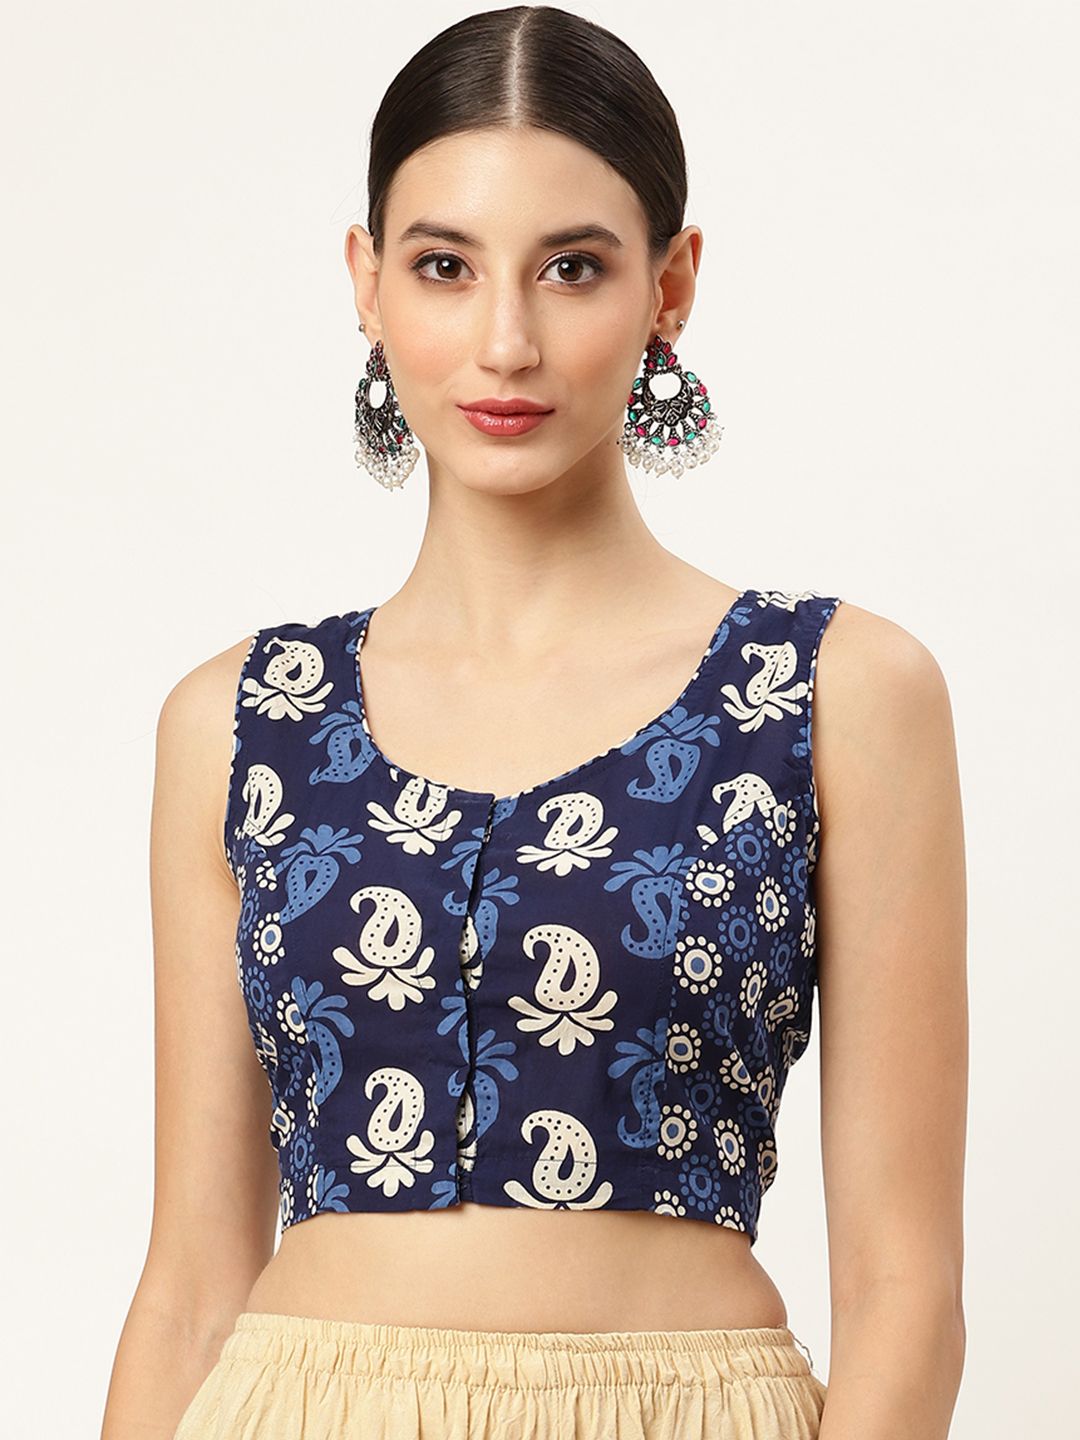 Molcha Navy Blue & Beige Ethnic Motif Printed Saree Blouse Price in India